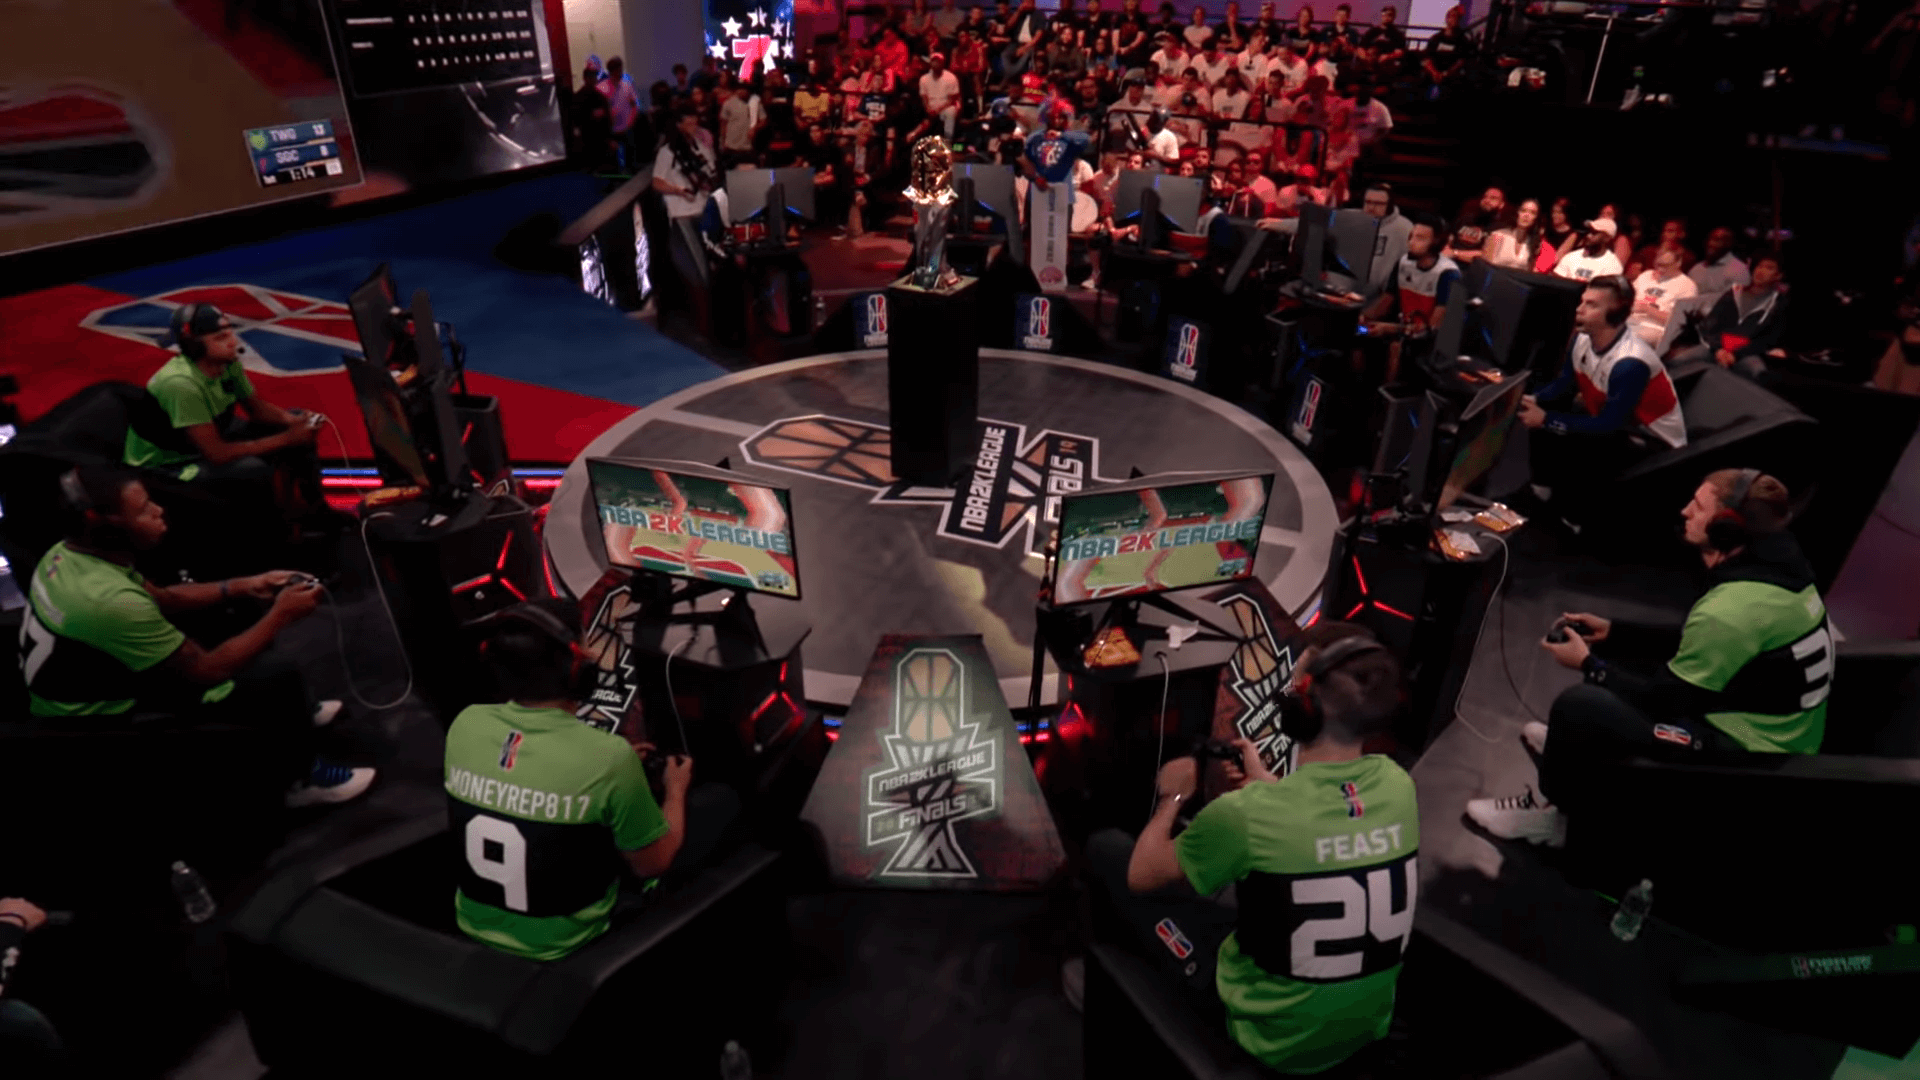 NBA 2K League to Host Online Tournament Including Fan-Made Teams